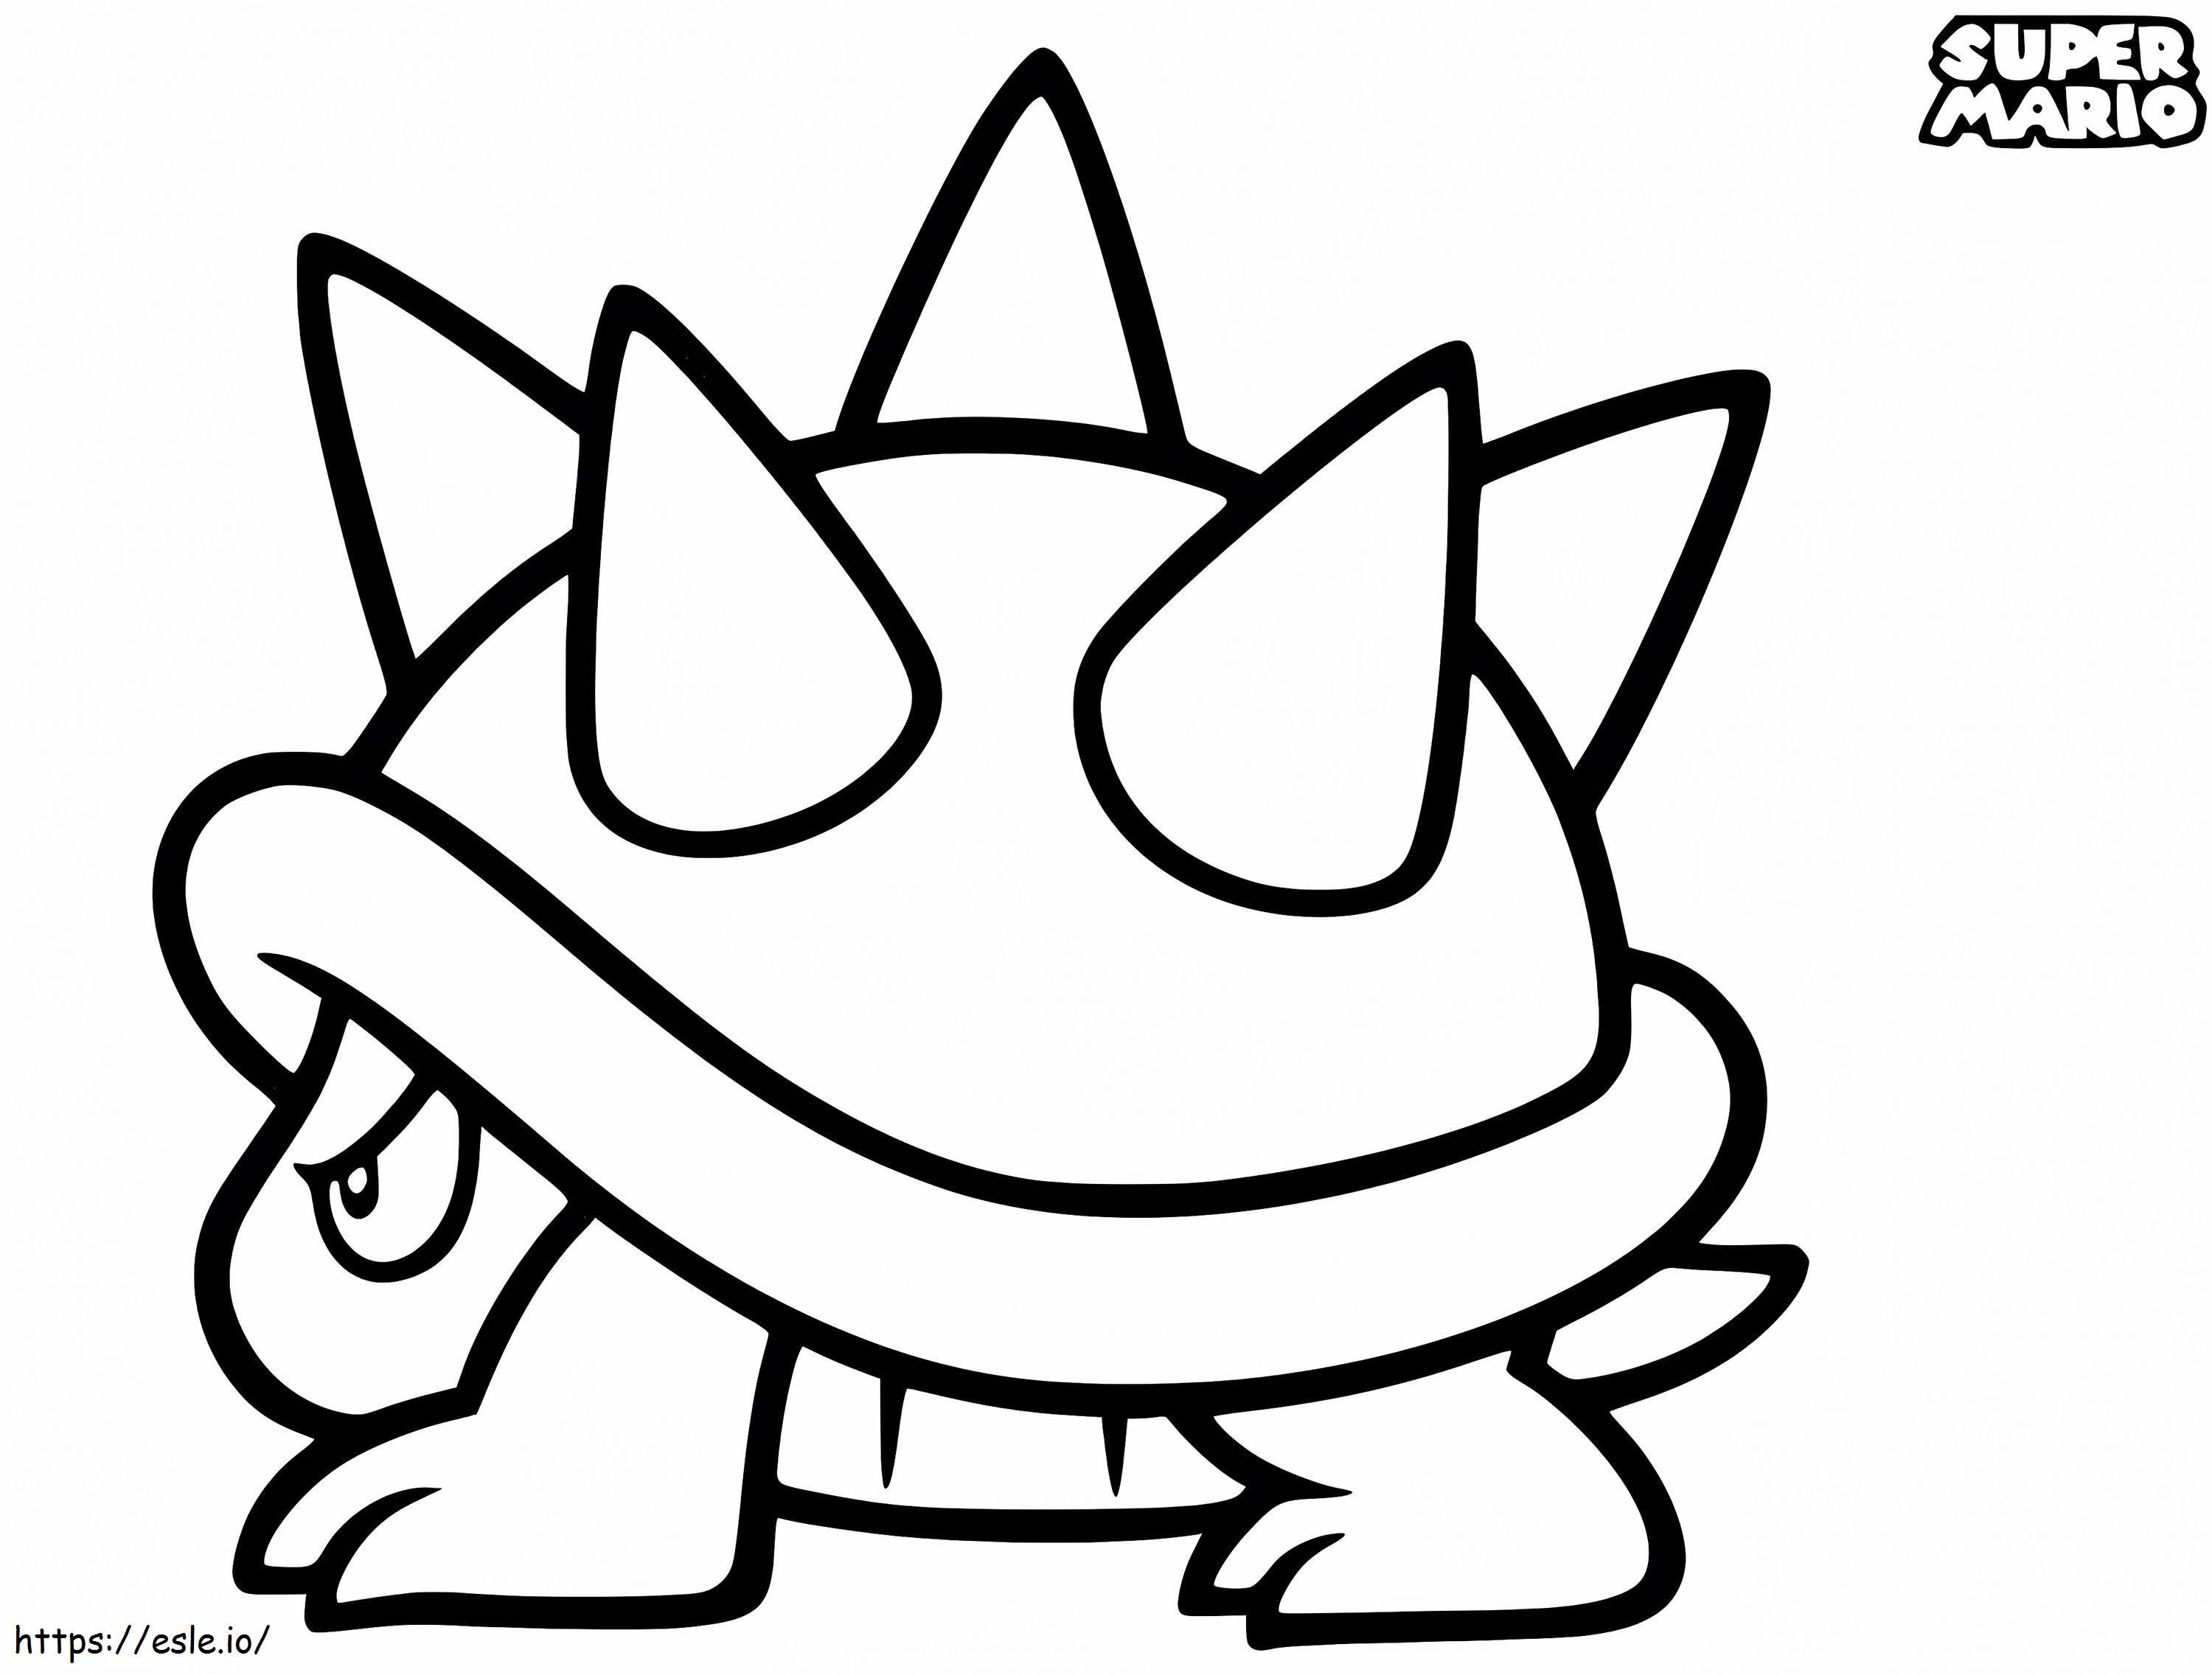 Super Mario Spiny Spine Shelled coloring page